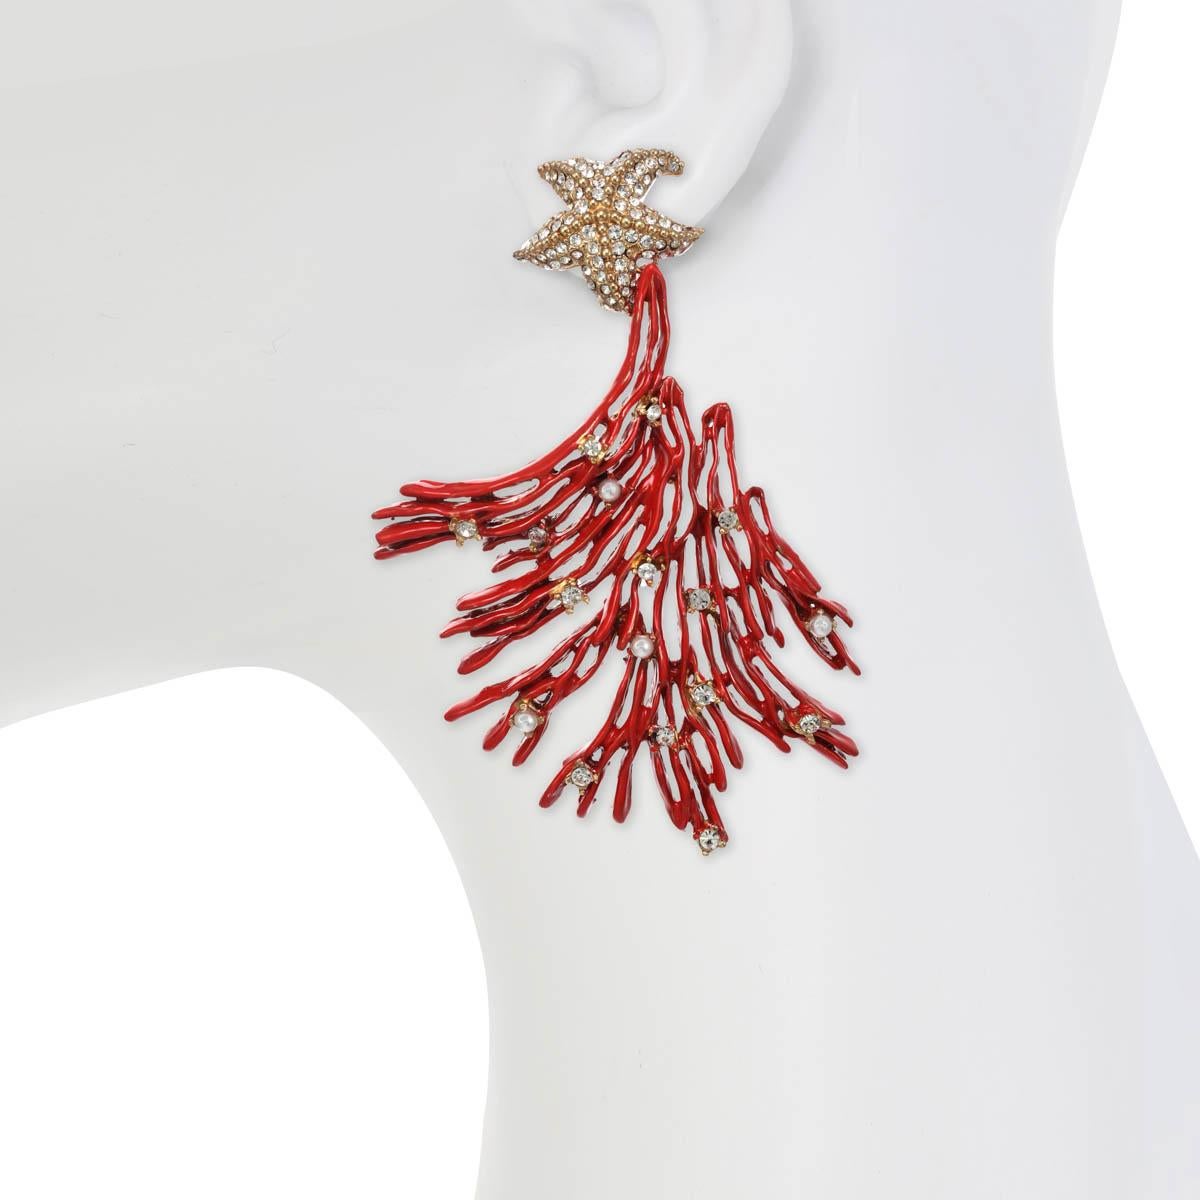 Living in Gold & Red!
“Laguna” is an Italian name meaning “A body of water cut off from a larger body by a reef of sand or coral”, perfectly suits  this gorgeous pair of statement earrings. Wear your hair up in an elegant style and make a statement